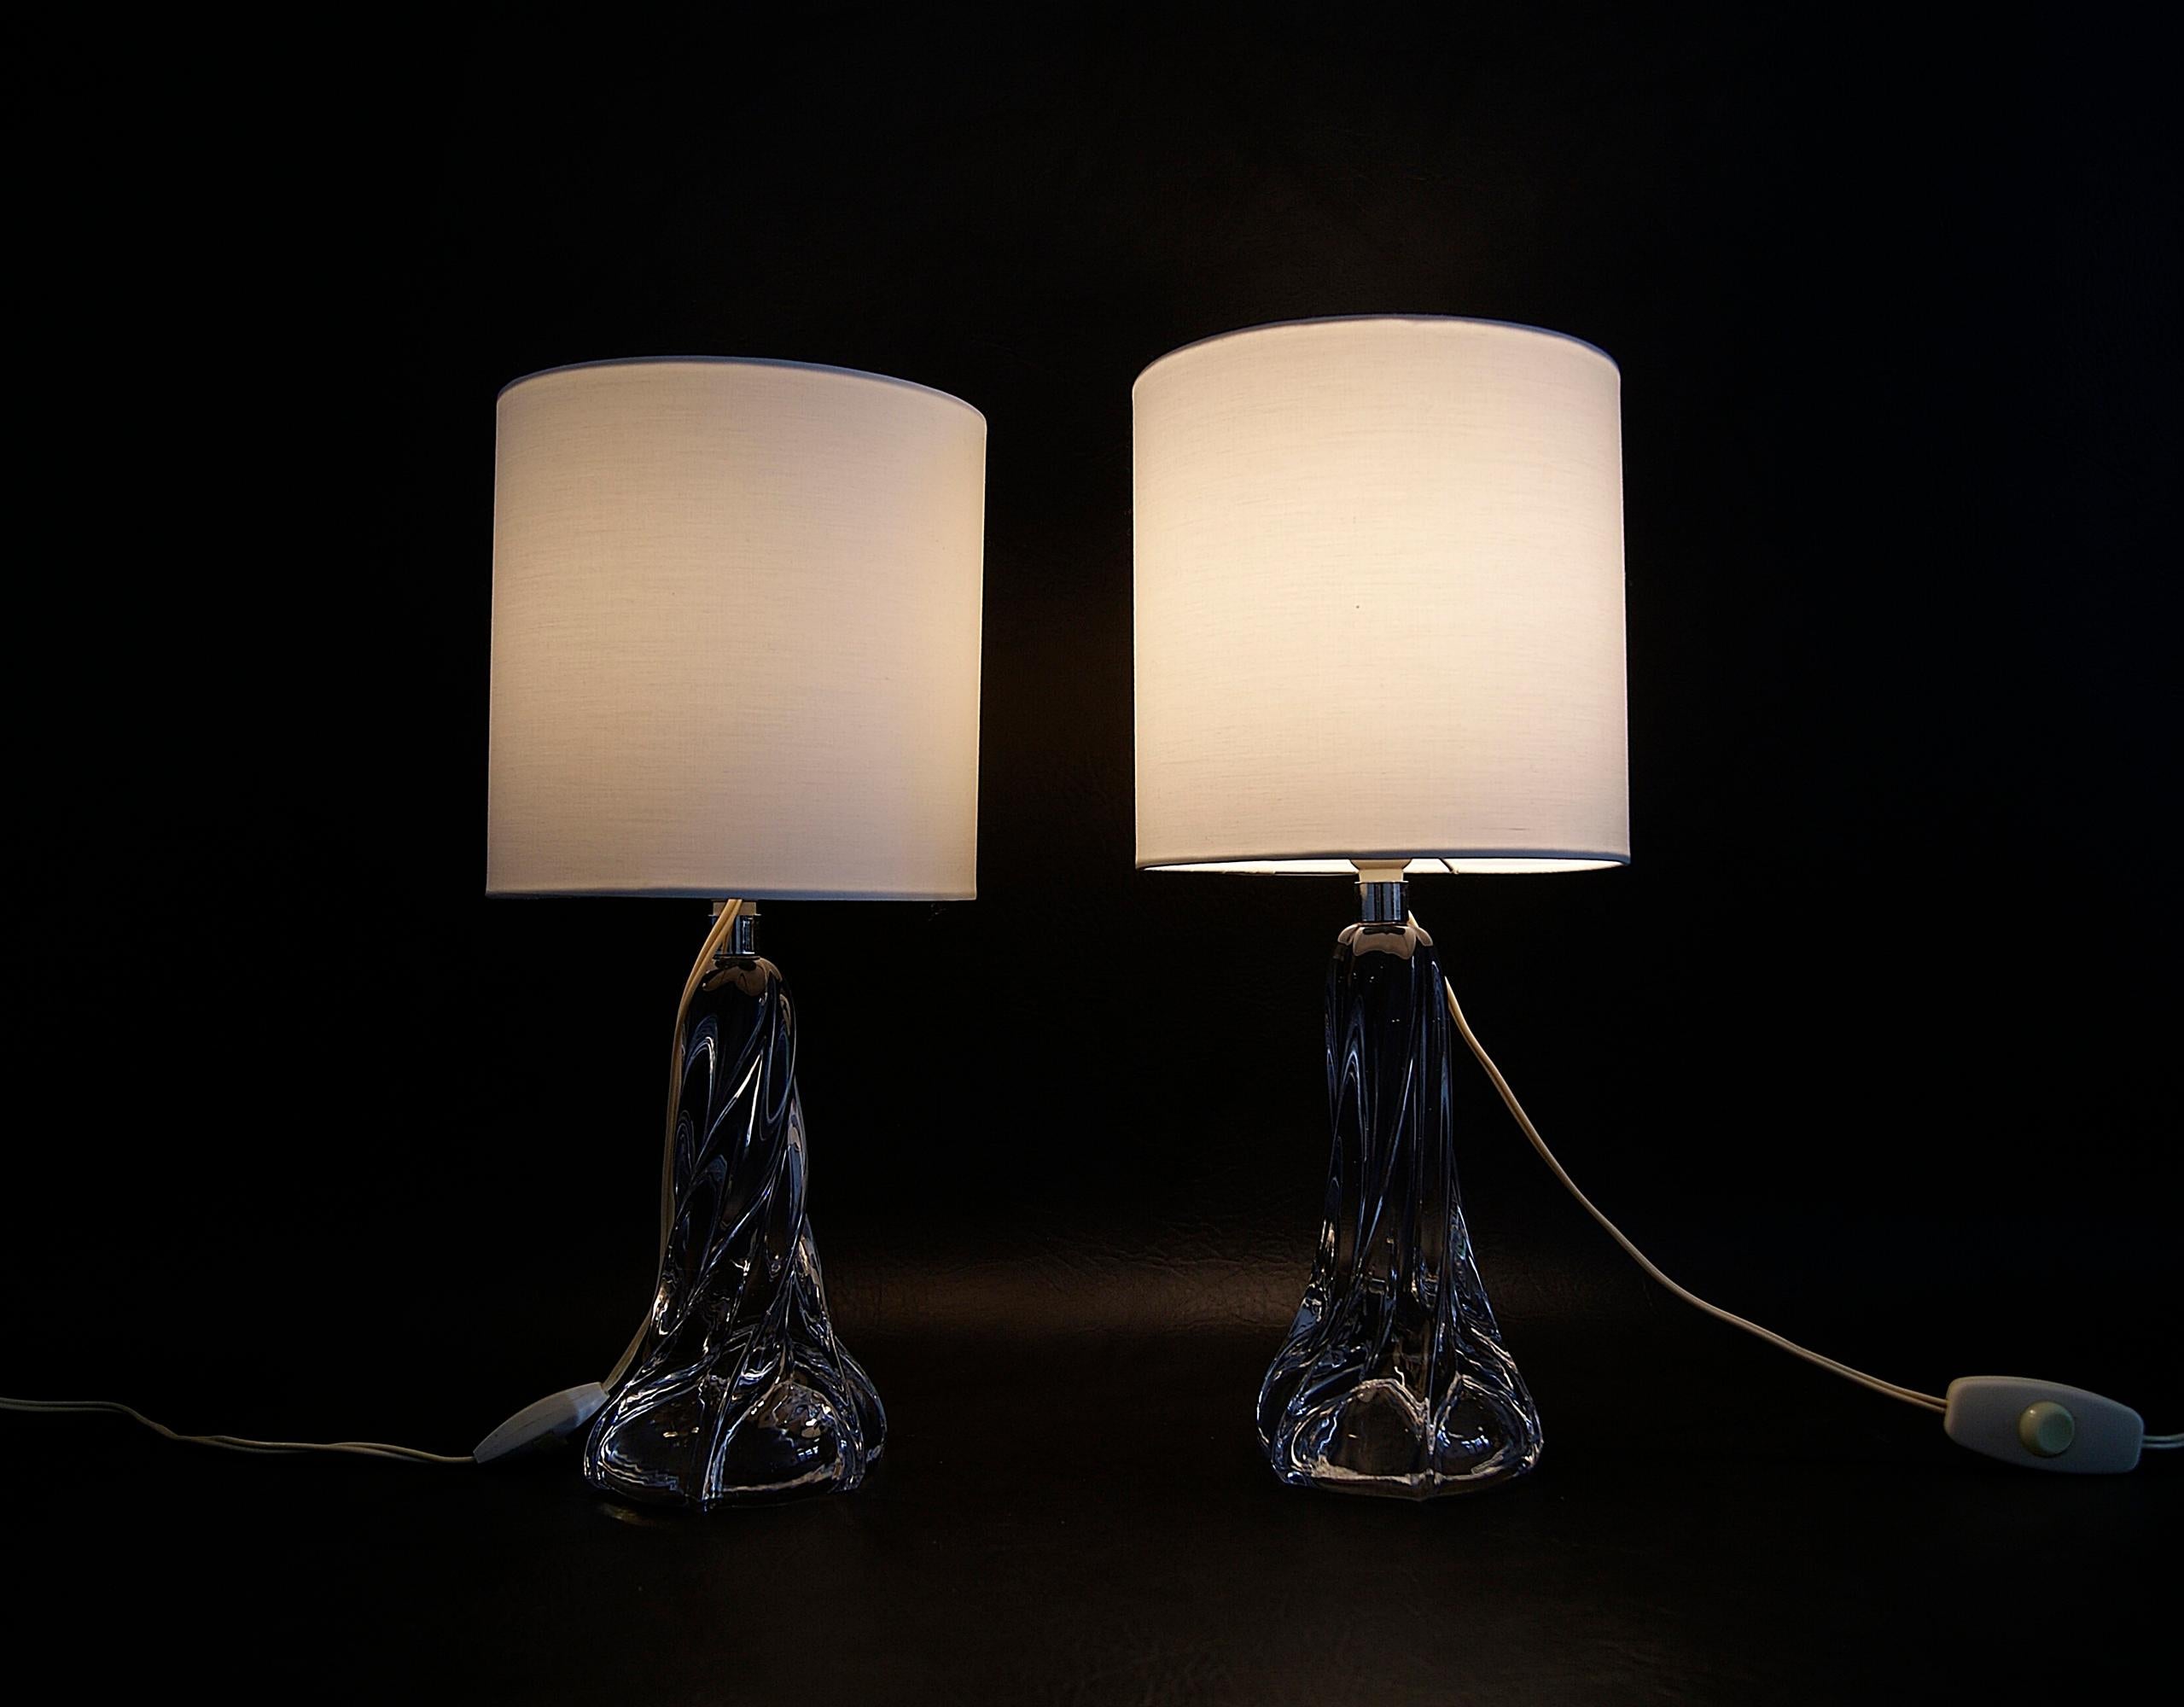 Daum style pair of crystal table lamps, France, 1960s.
Heavy christal glass feet inthe manner of daum.
Lamp shades new.





Art.-Nr. 0288.